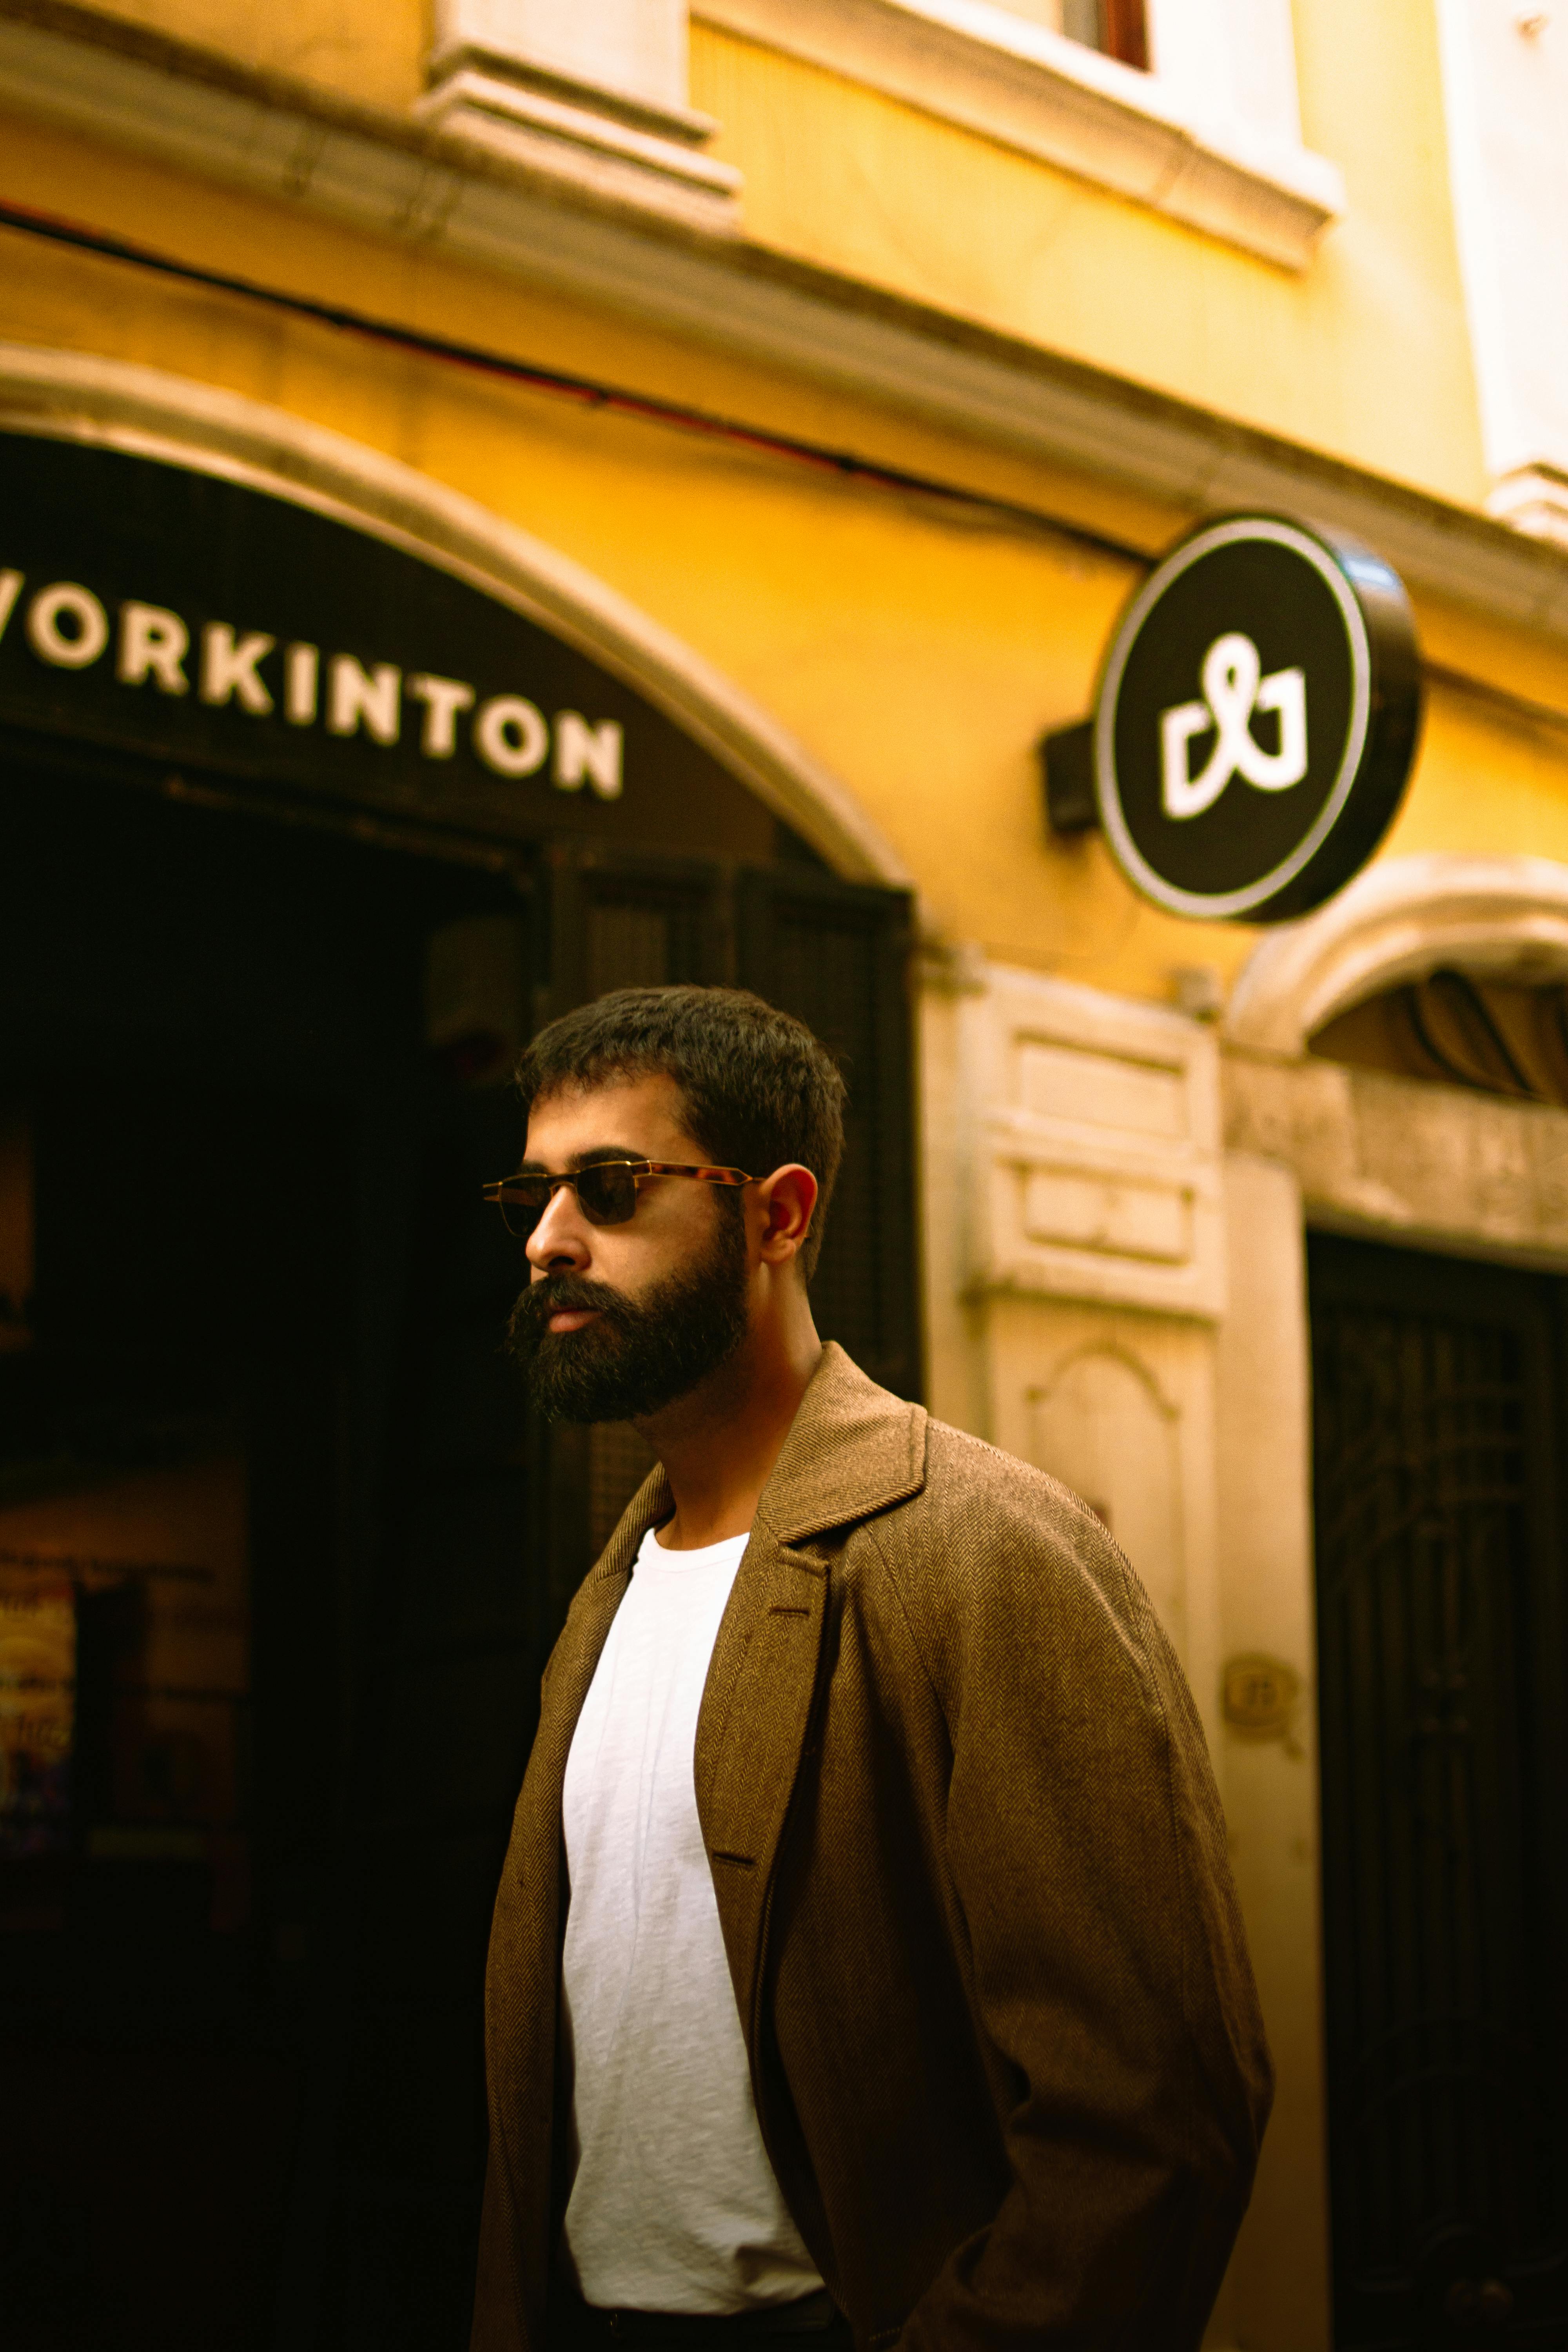 A man with a beard and sunglasses standing in front of a building